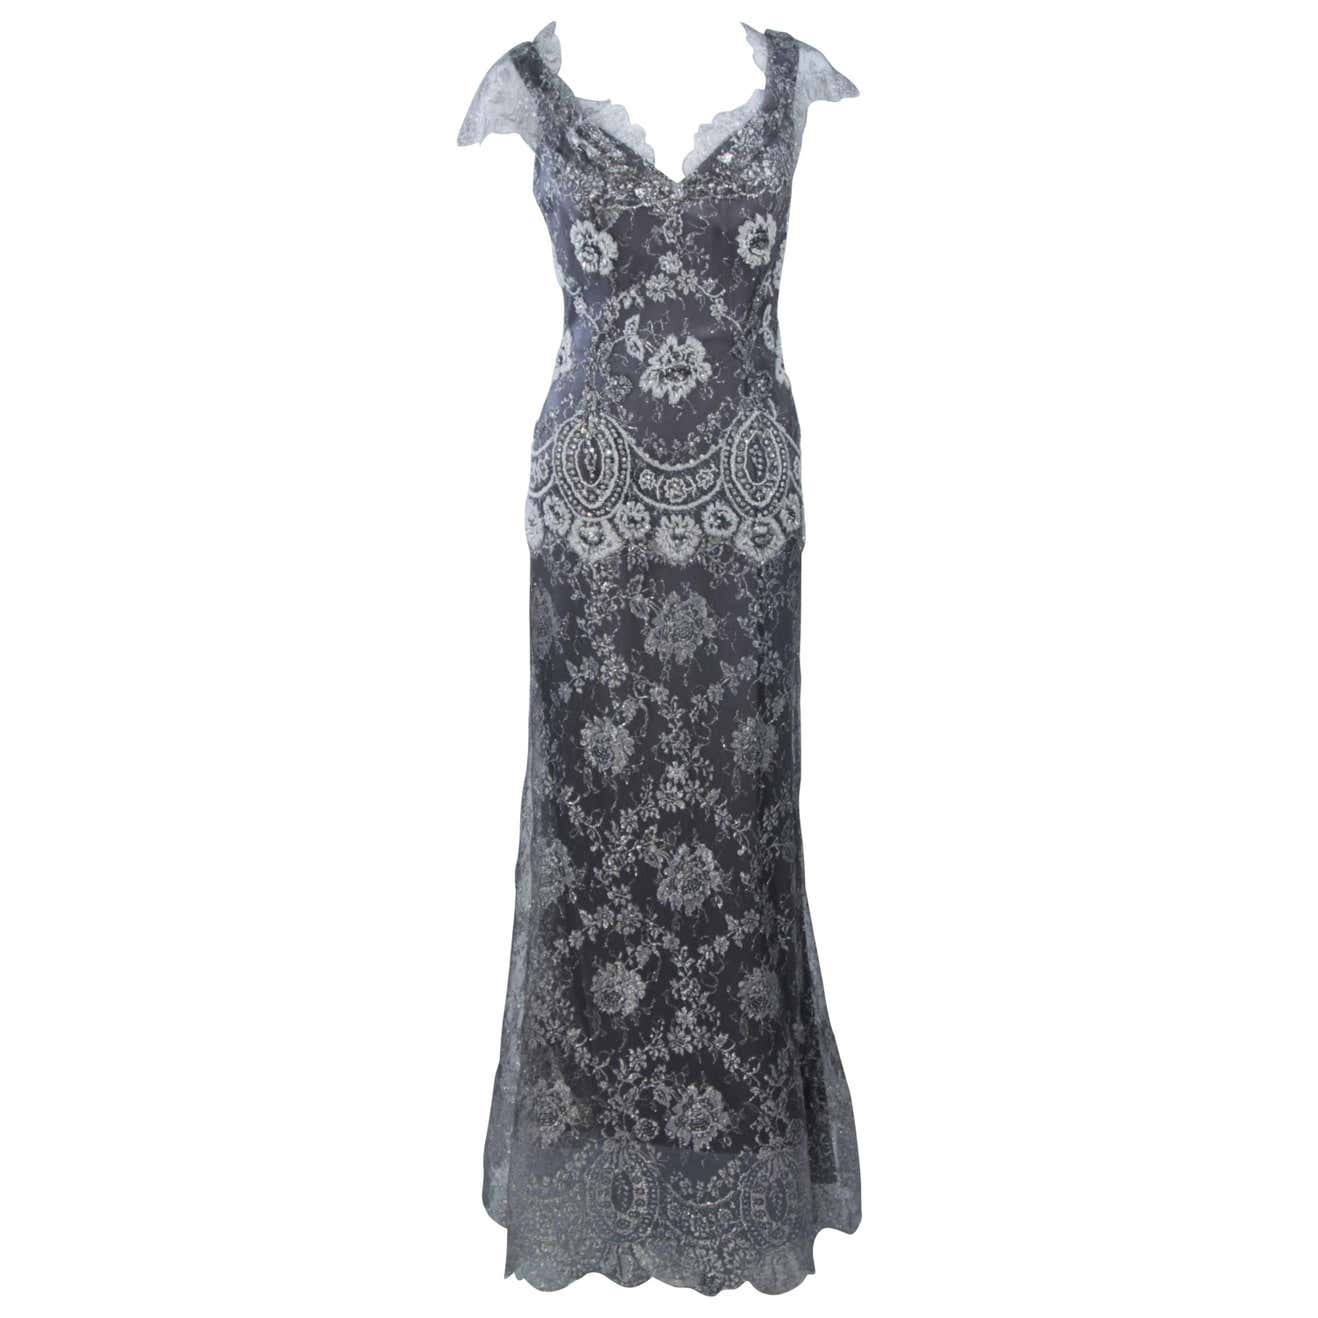 FE ZANDI Silver Lace Lame Gown with Scalloped Edges Size 8-10 For Sale ...